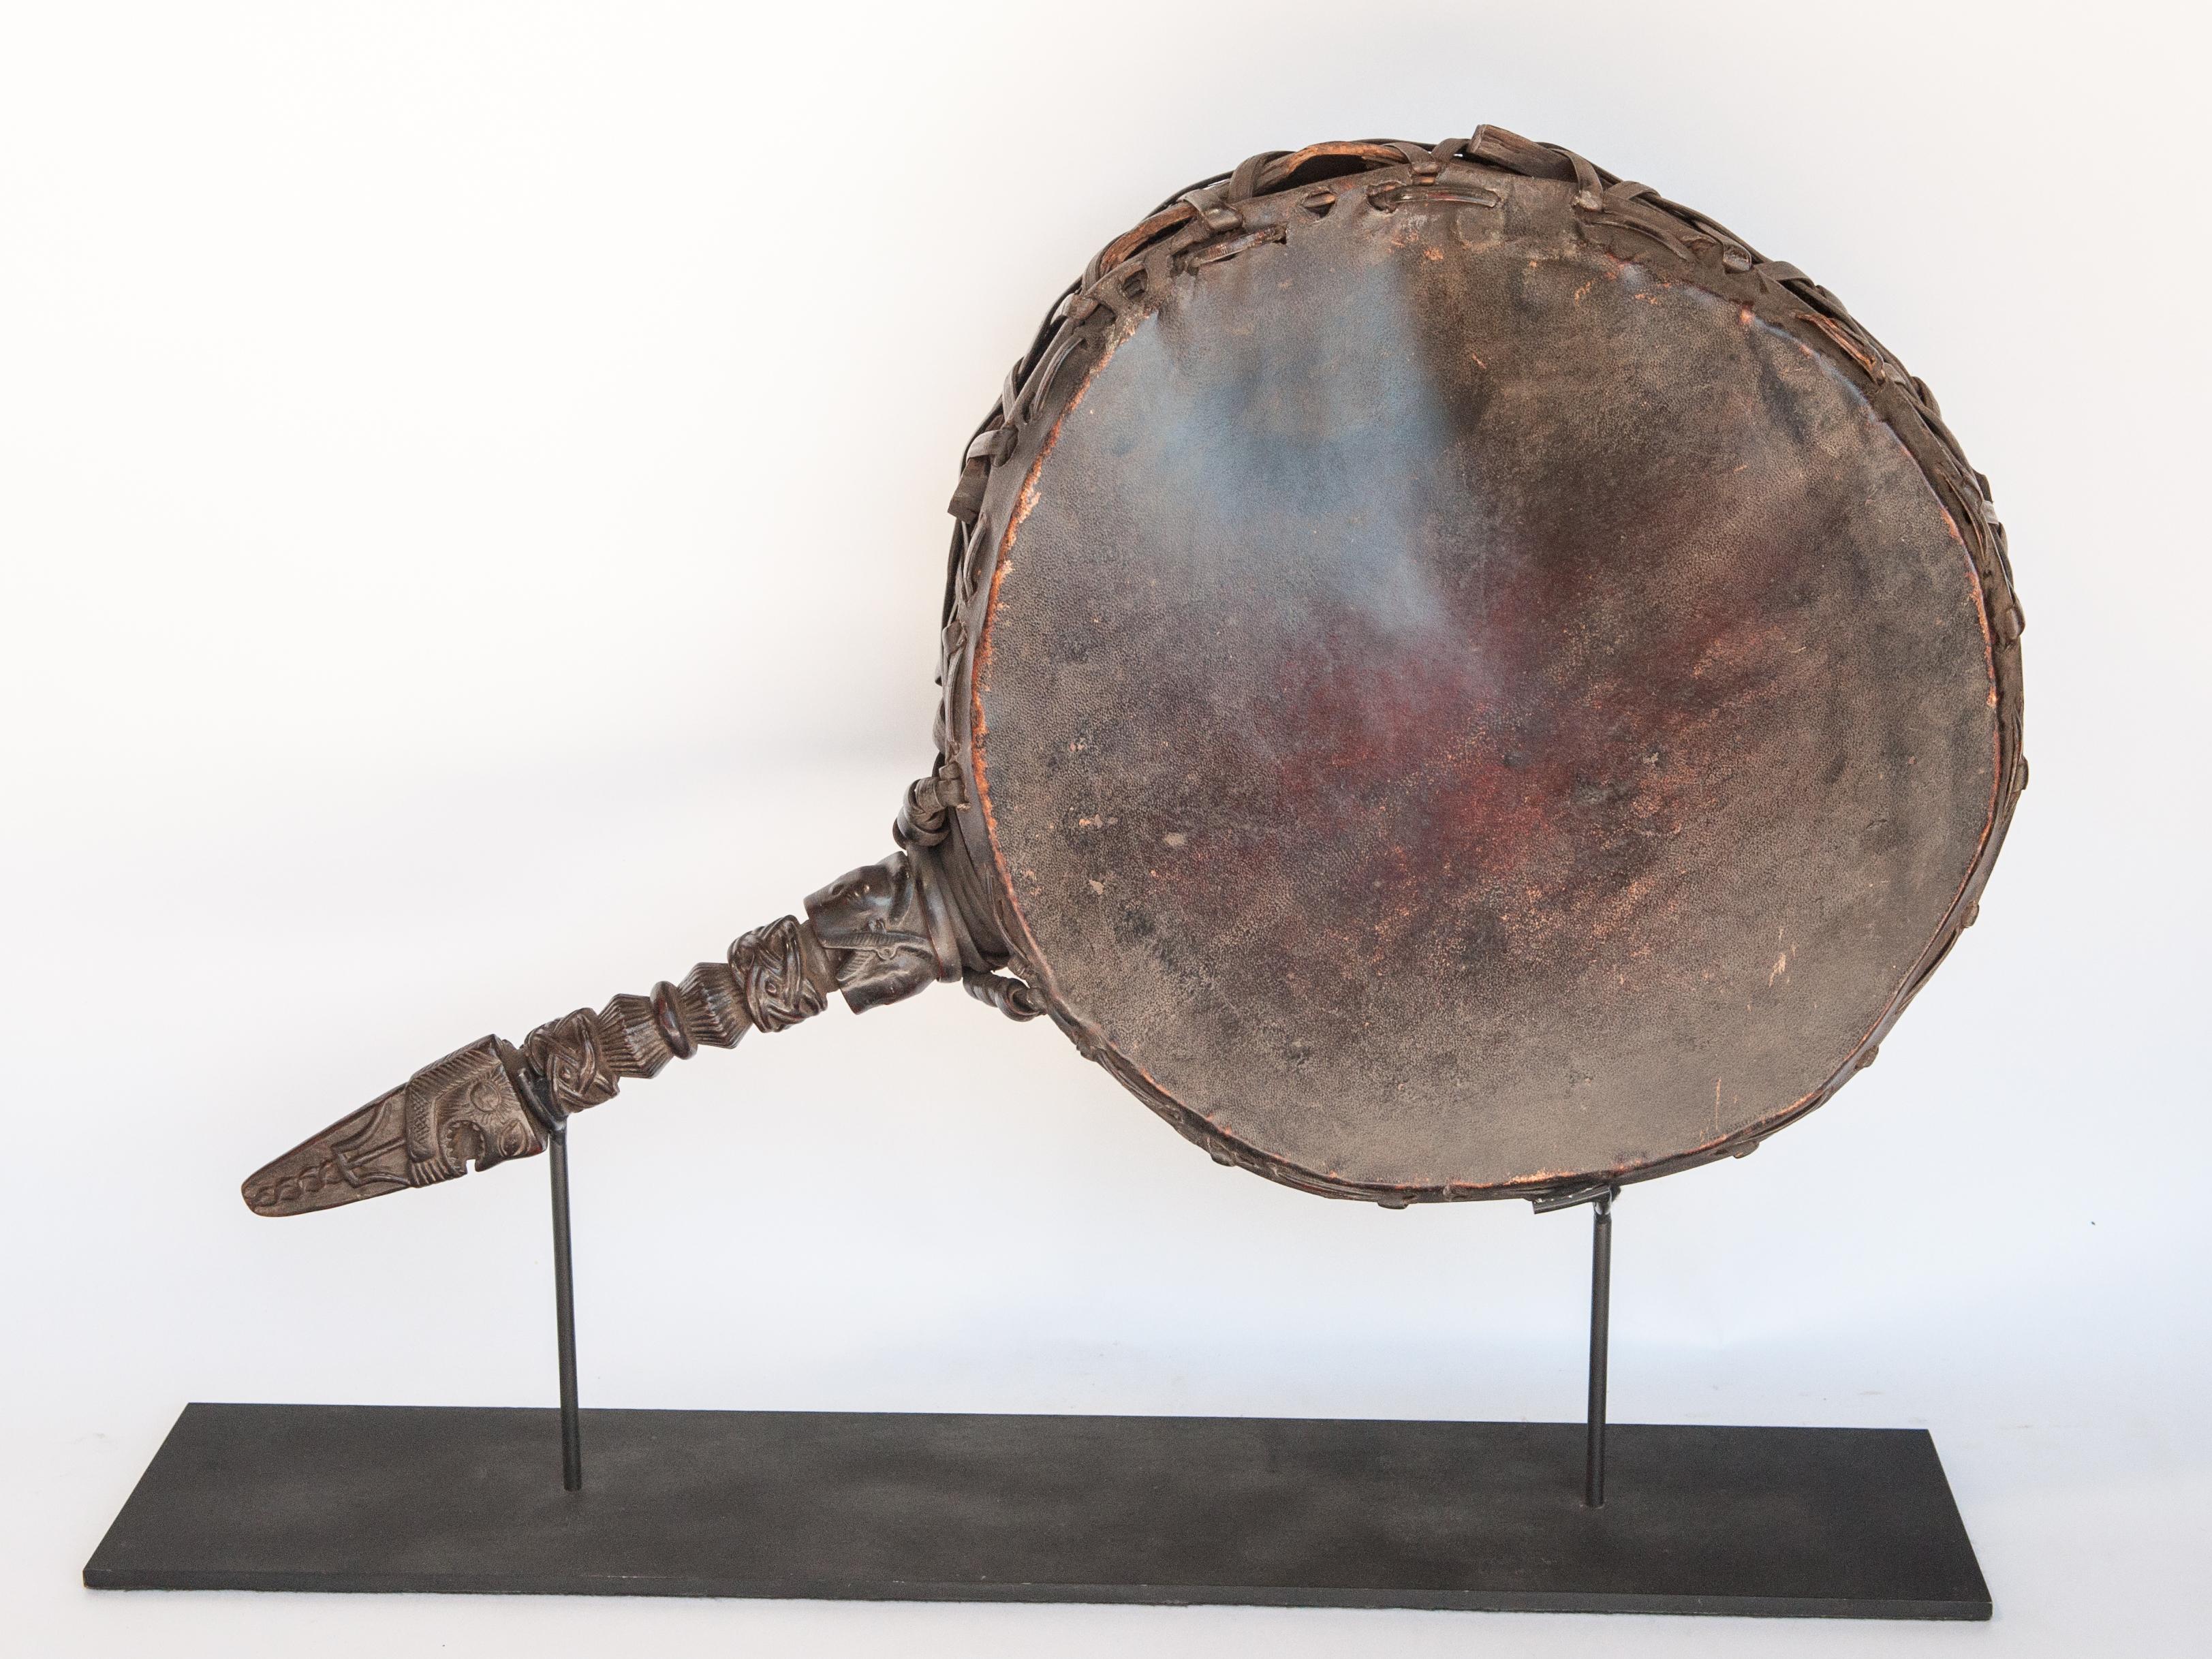 Tribal Shaman Drum, Carved Wooden Handle, Nepal Himalaya, Mid-20th Century, on Stand